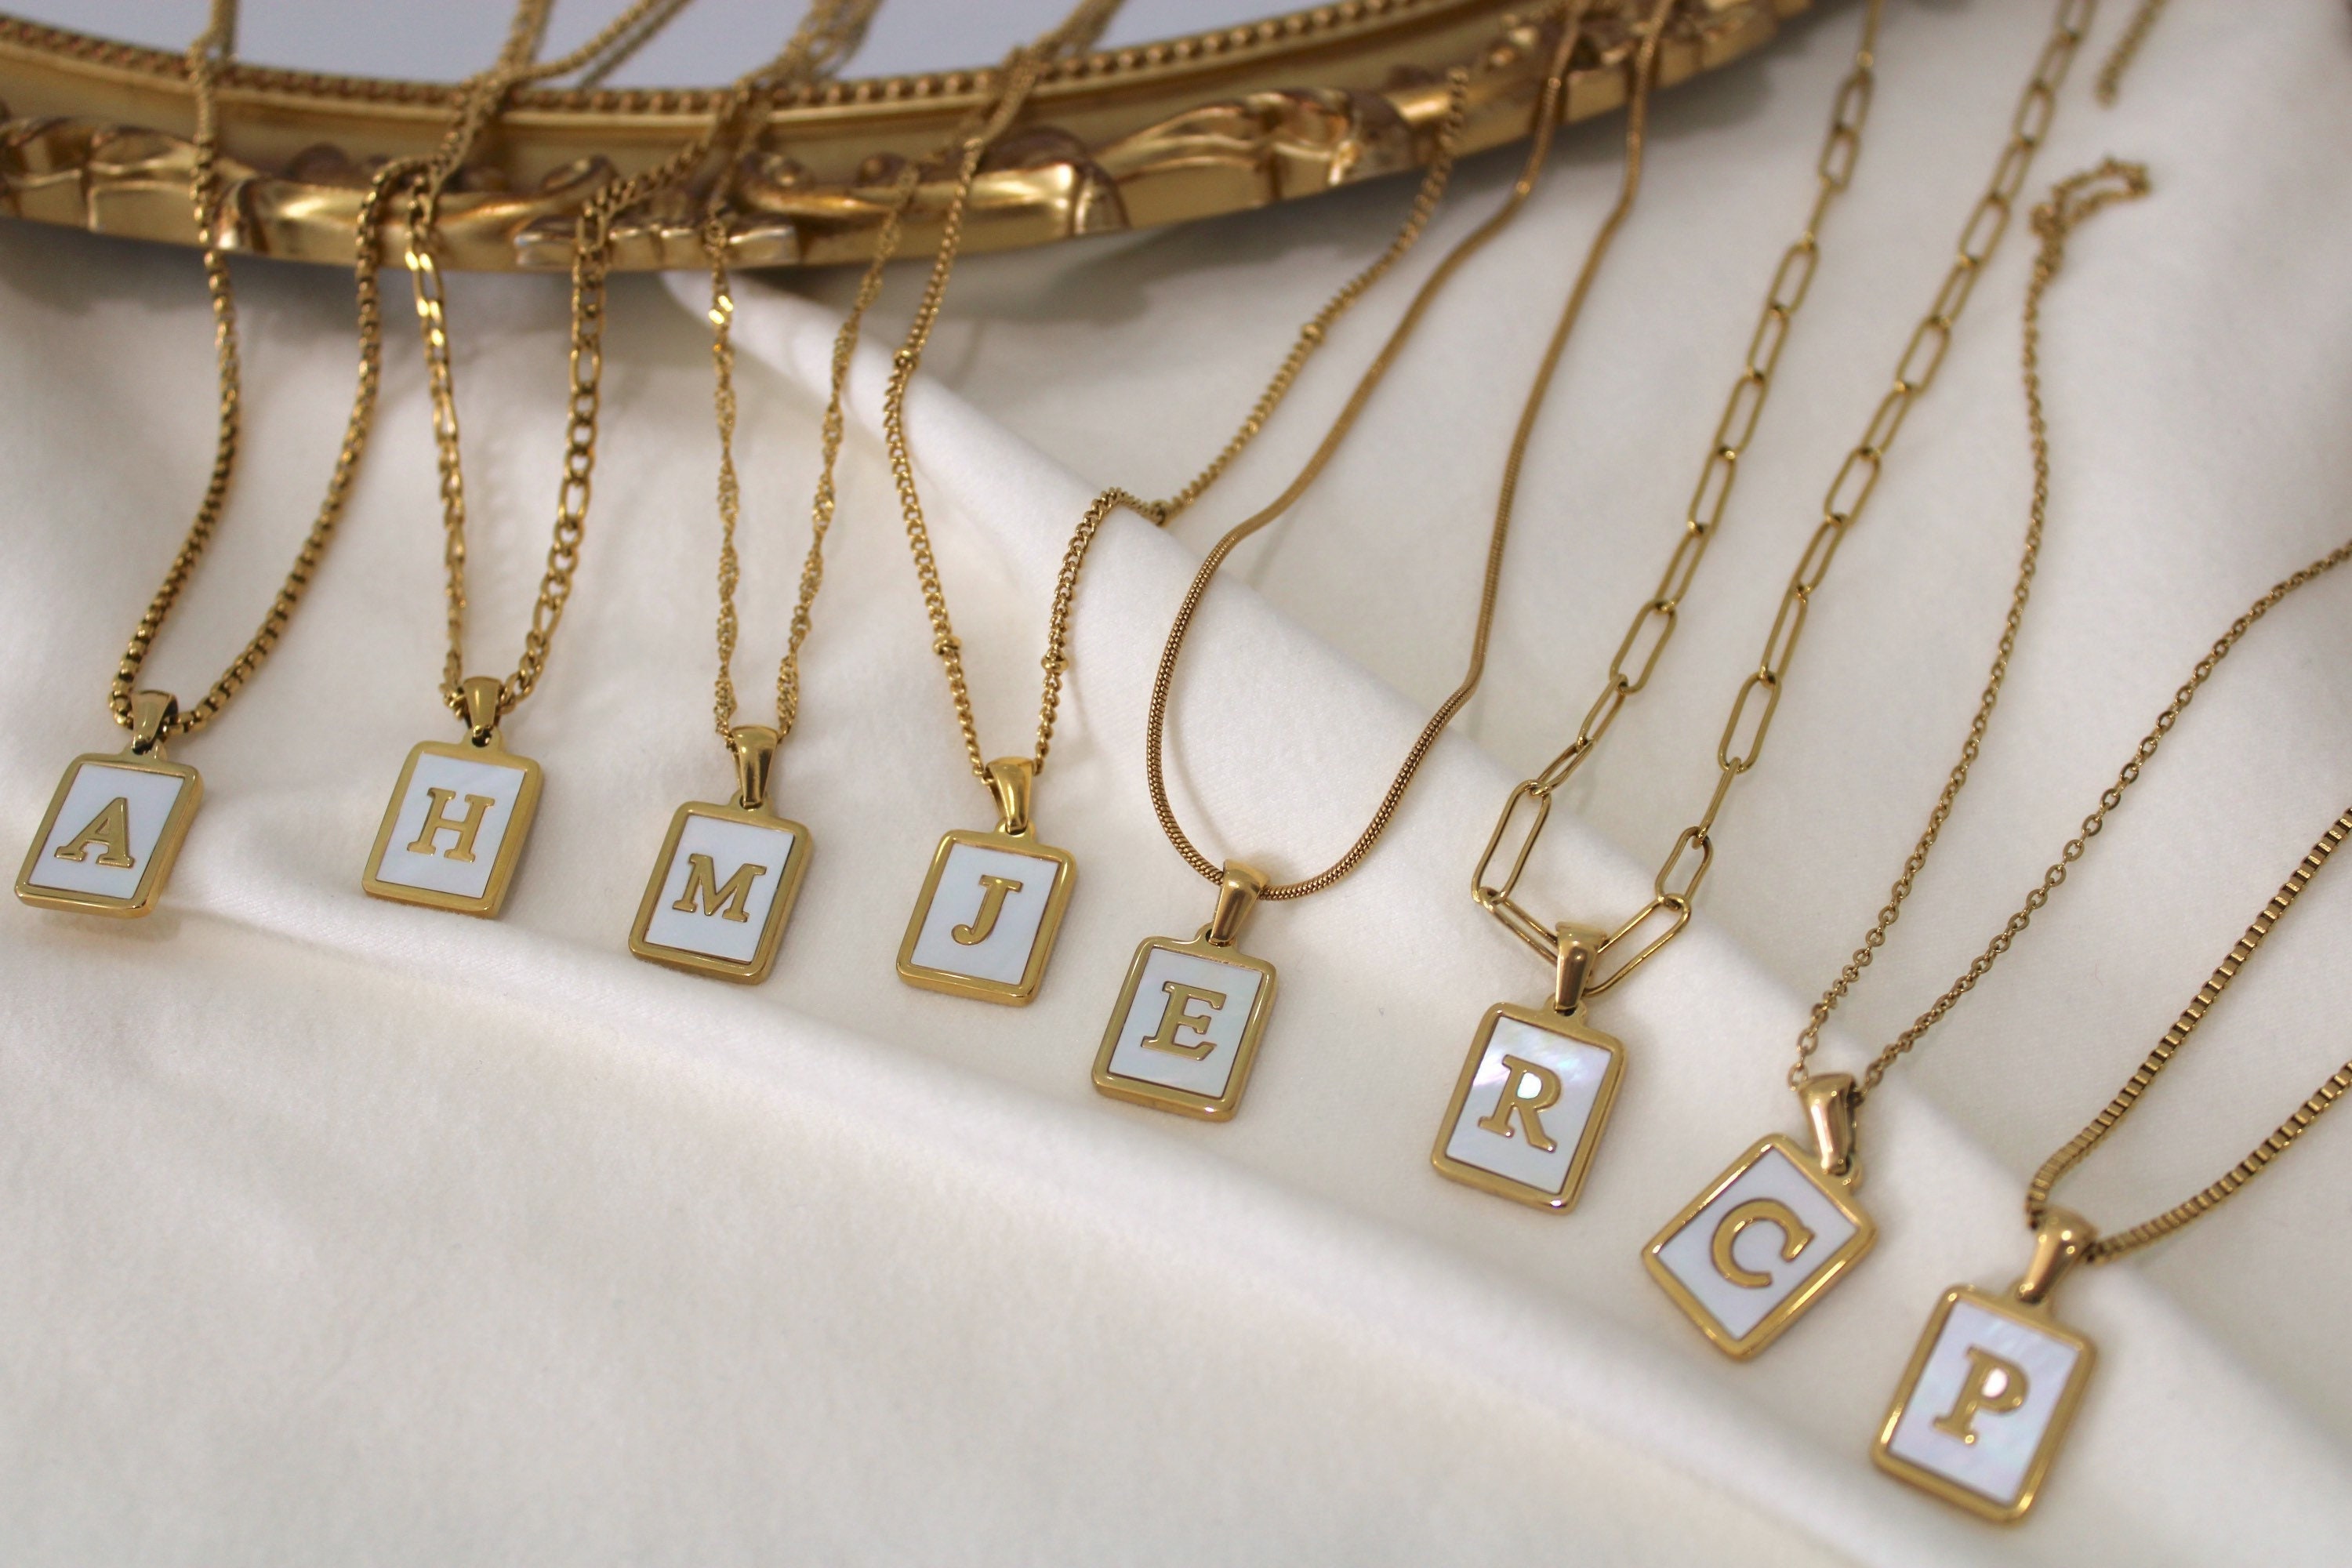 Architecture of a Mom: Mod Podge Initial Necklaces